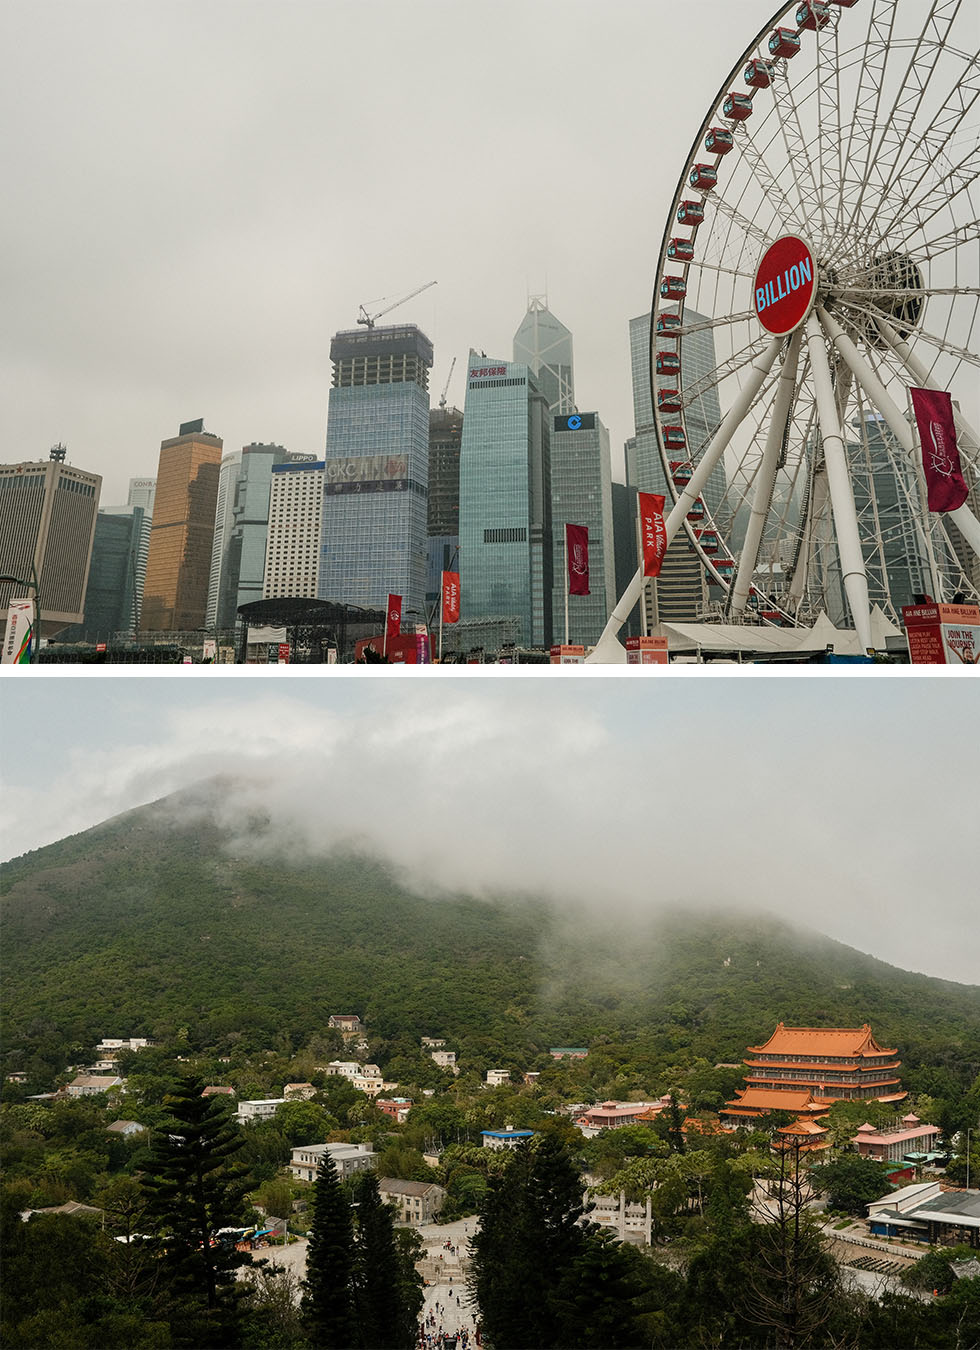 Two in one image Hong Kong Ferris wheel and a cloudy mountain